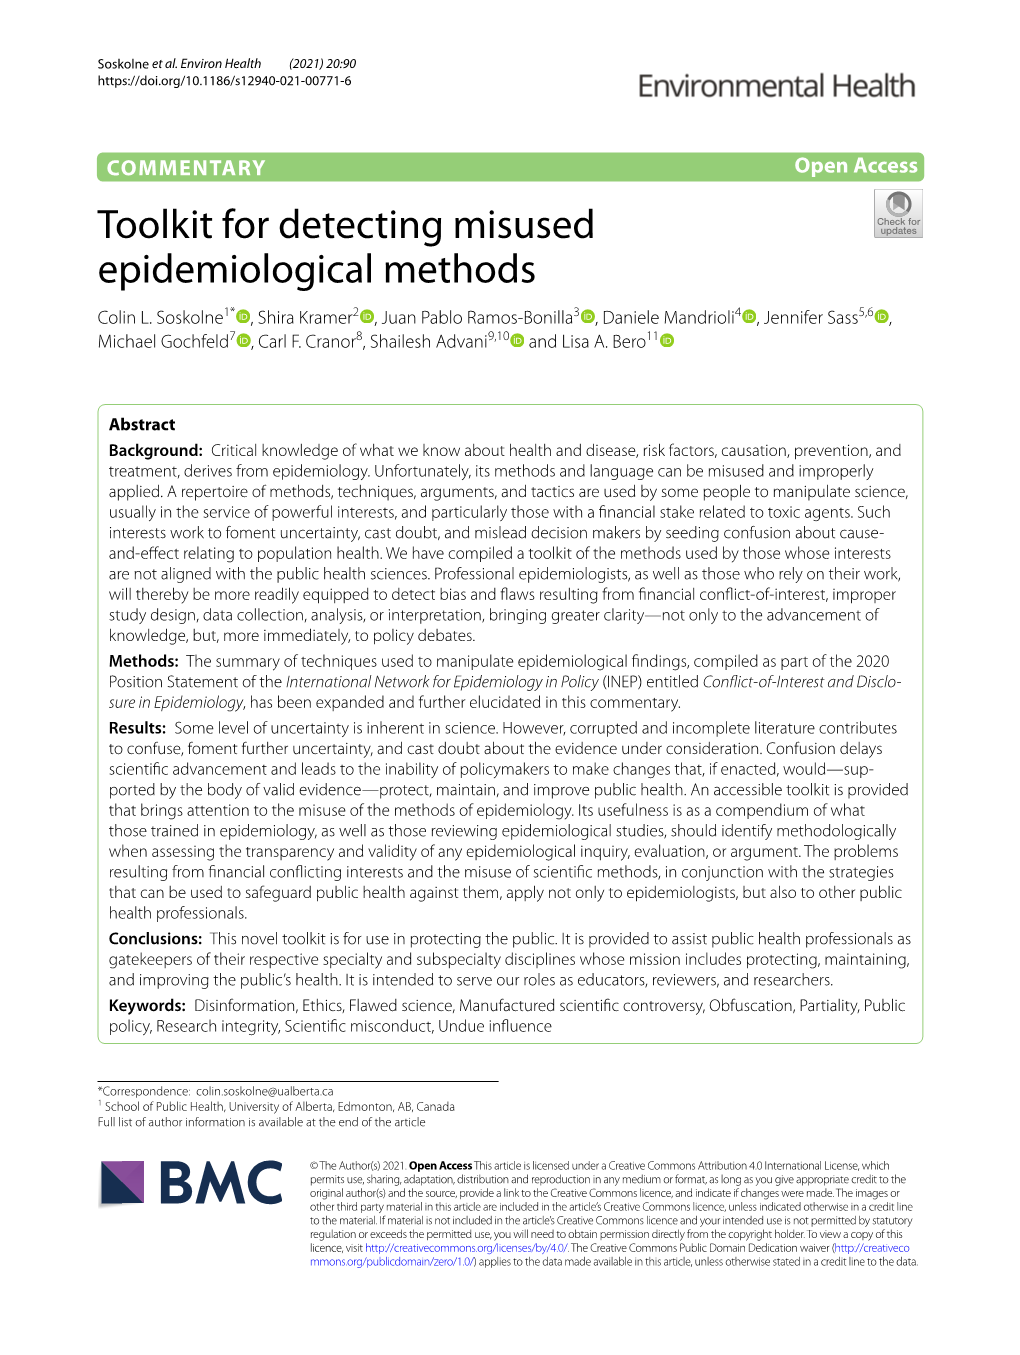 Toolkit for Detecting Misused Epidemiological Methods Colin L